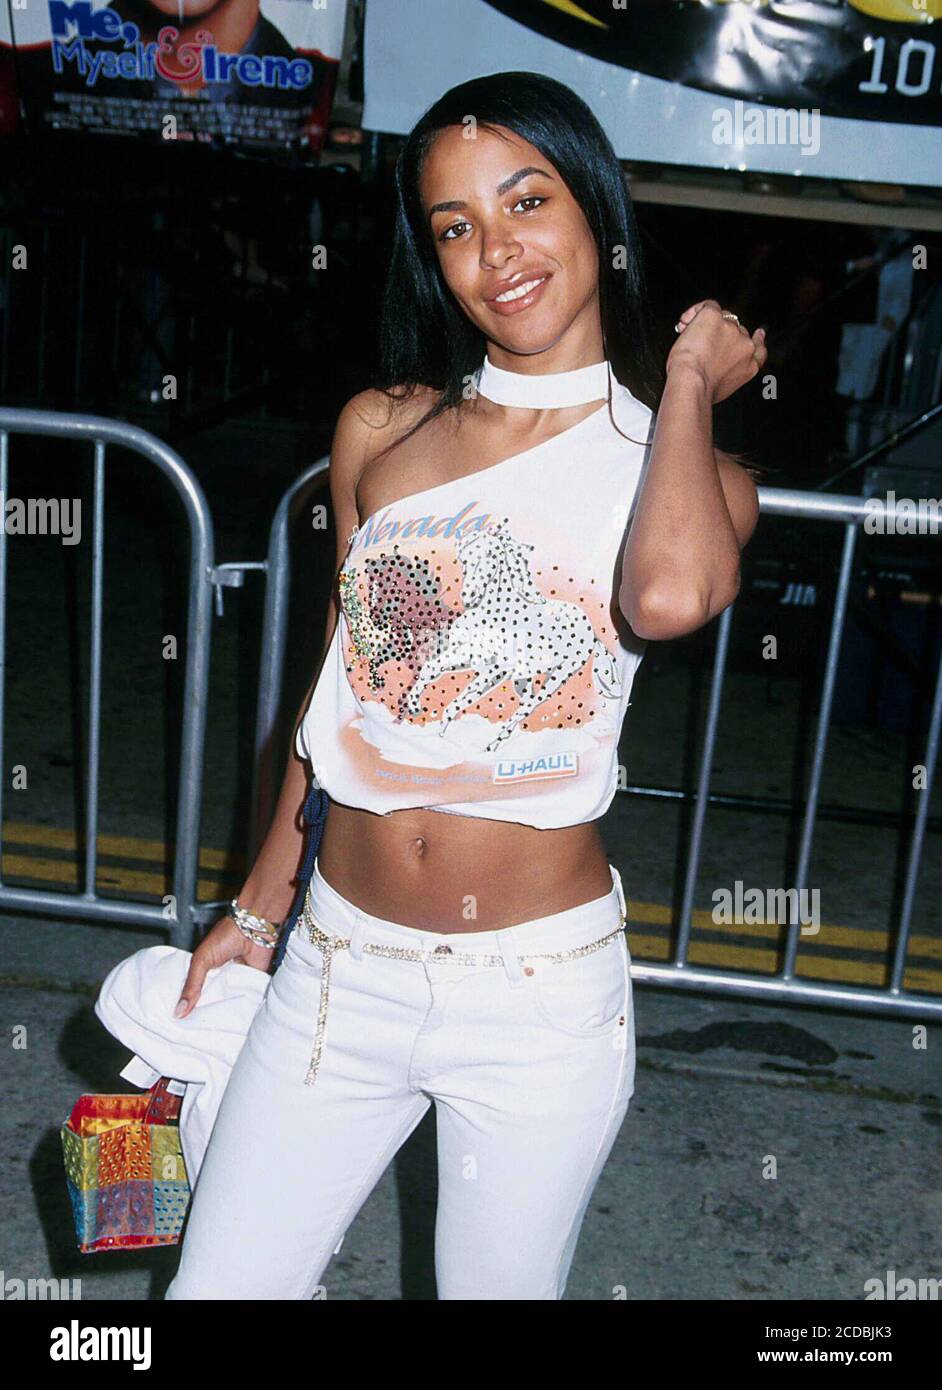 15 Jun 2000, Westwood, Los Angeles, California, USA --- Aaliyah at the premiere of Me, Myself and Irene. --- ' Tsuni / USA 'Aaliyah 223 Aaliyah 223 Celebrities fashion / Three Quarters from the Red Carpet-1994-2000, one person, Vertical, Best of, Hollywood Life, Event in Hollywood Life - California,  Red Carpet Event, Vertical, USA, Film Industry, Celebrities,  Photography, Bestof, Arts Culture and Entertainment, , , Topix   Aaliyah 223 Event in Hollywood Life - California,  Red Carpet Event, Vertical, USA, Film Industry, Celebrities,  Photography, Bestof, Arts Culture and Entertainment, , , T Stock Photo